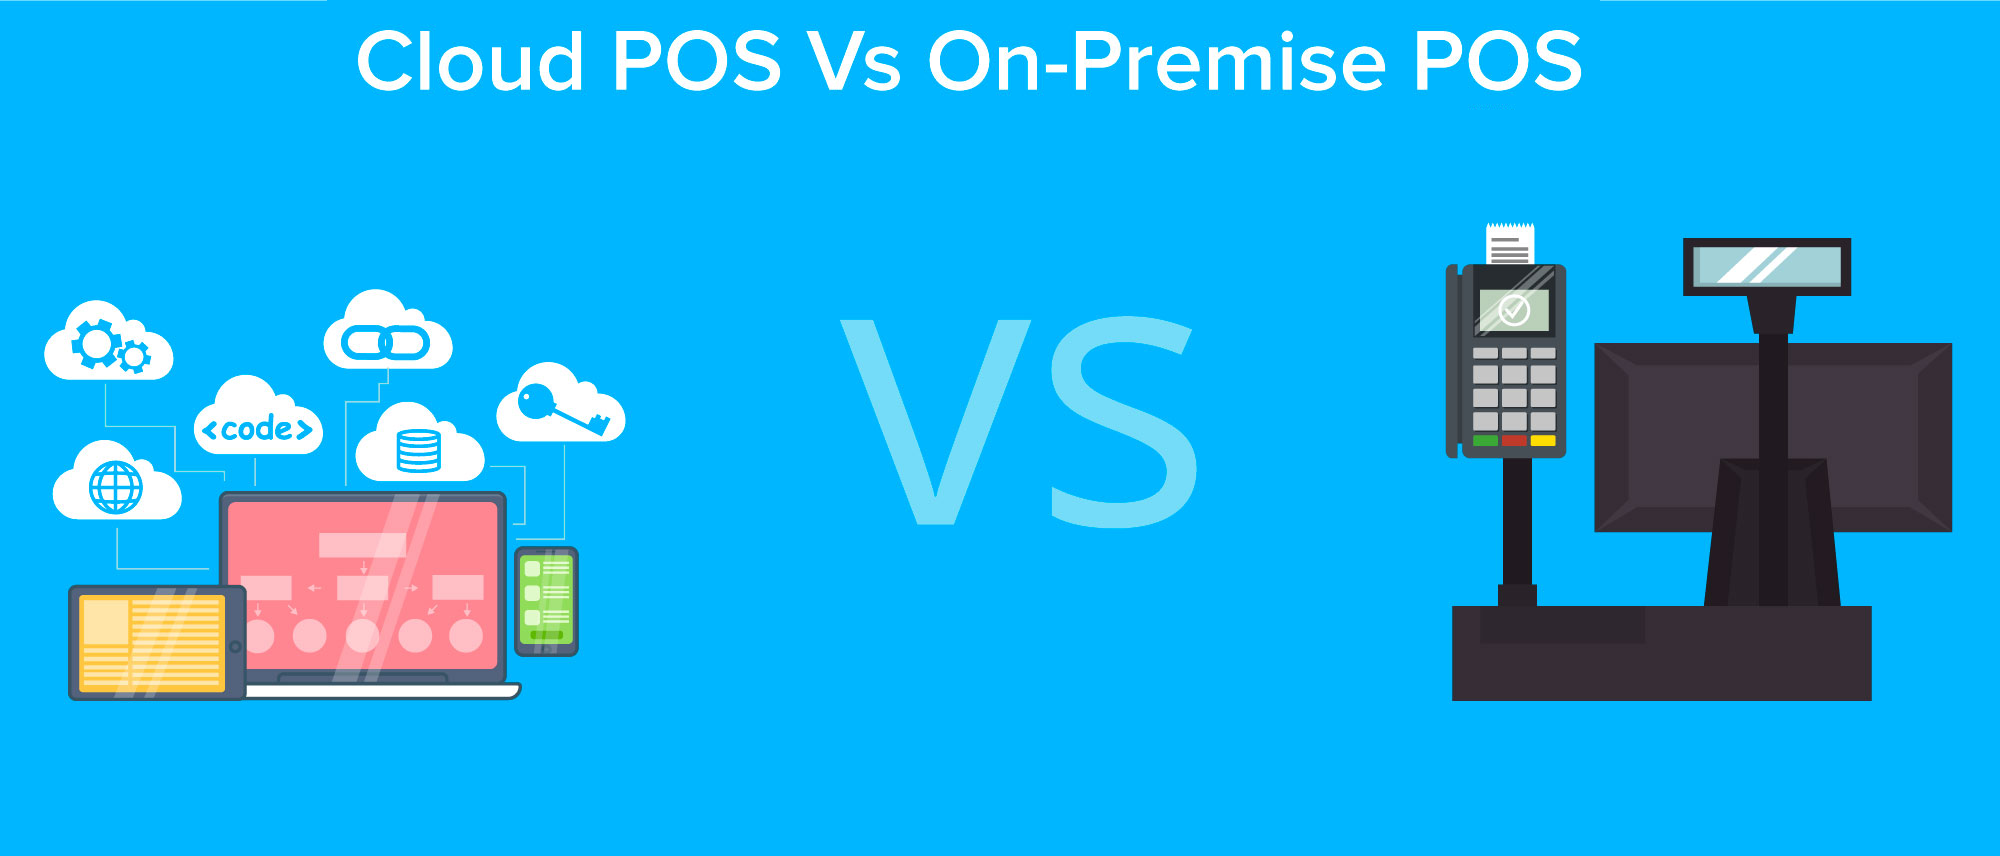 On-premise and cloud-based POS systems